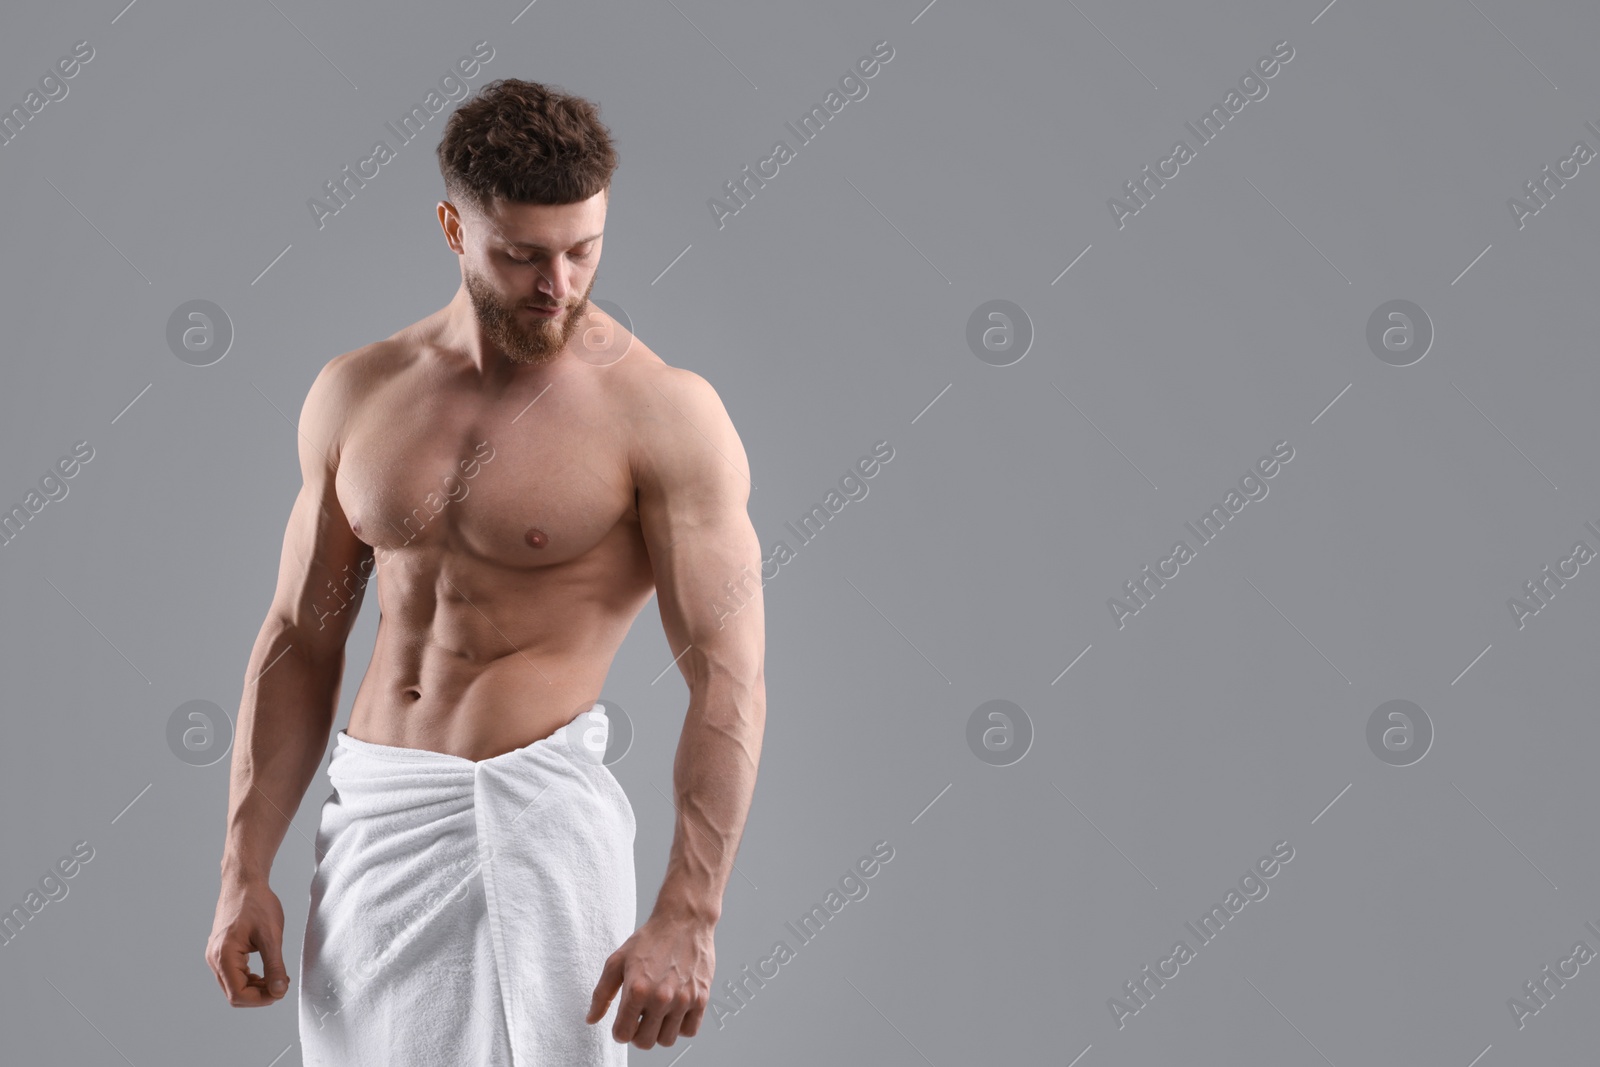 Photo of Muscular man showing abs on grey background, space for text